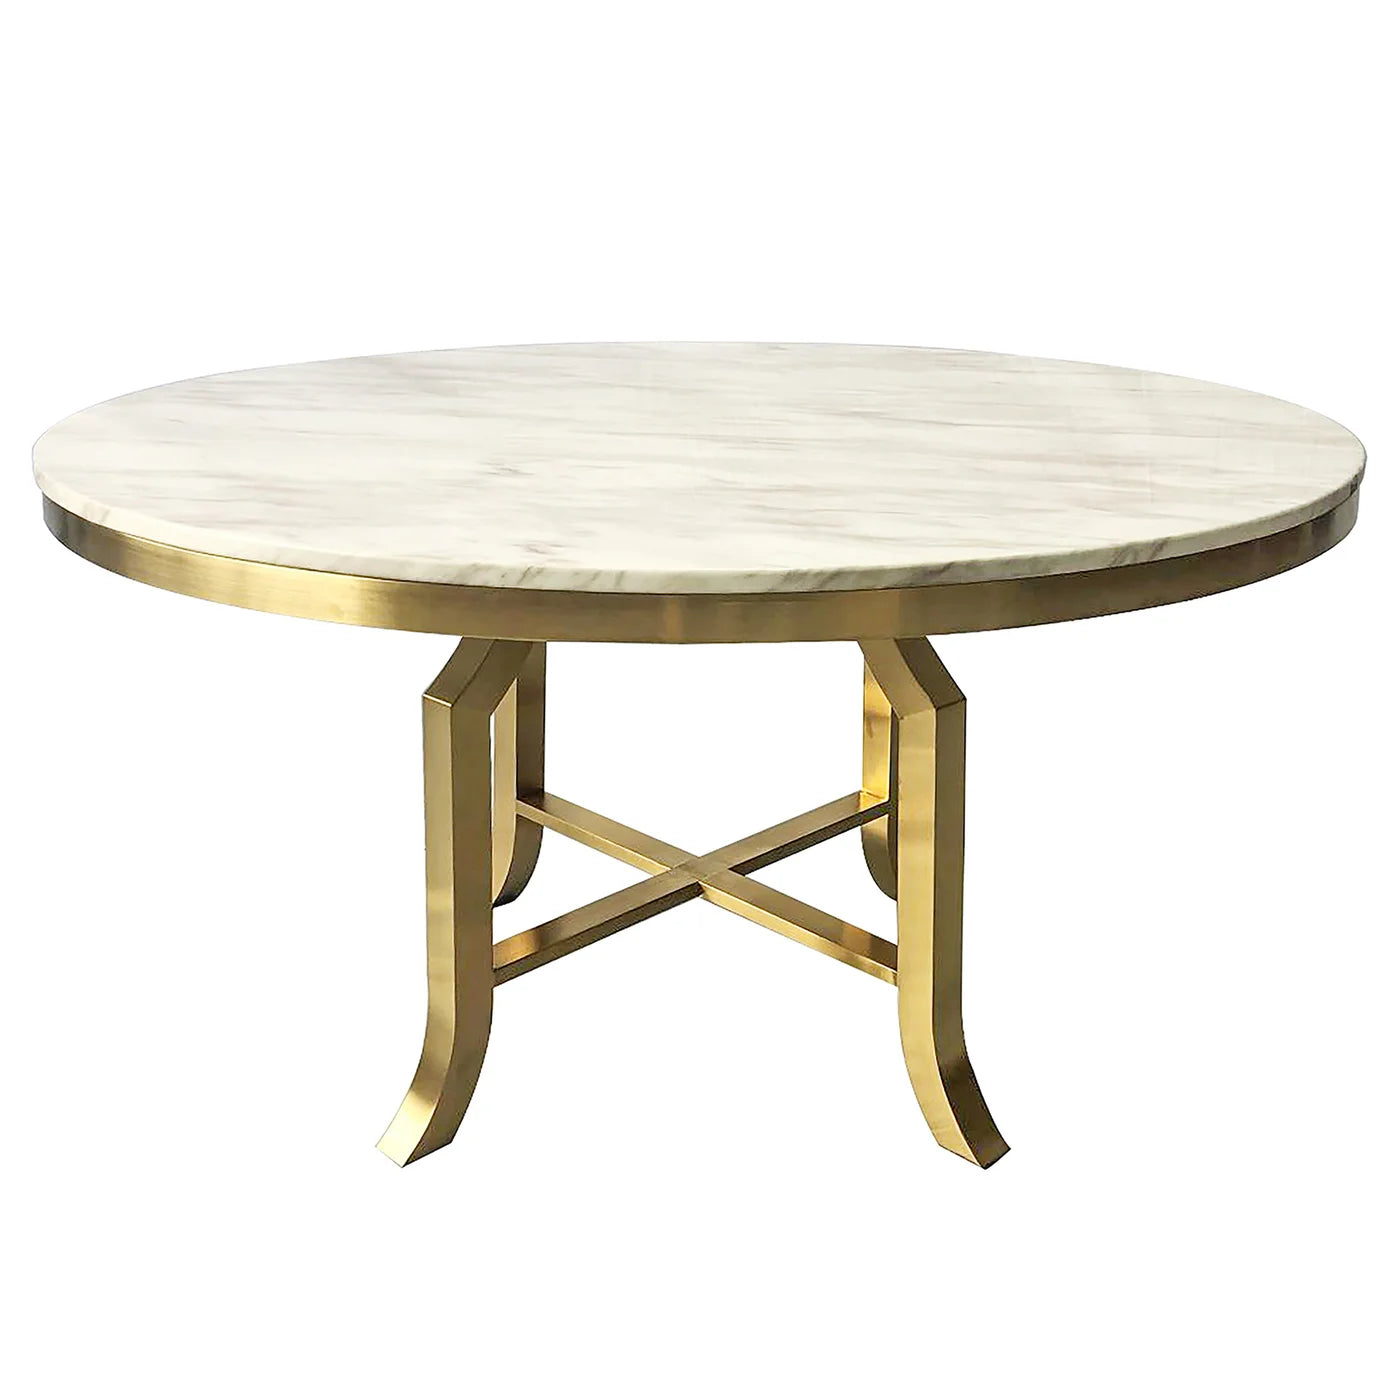 FILLMORE DINING TABLE | Brushed Gold Finish on Metal with Veneer Marble Top